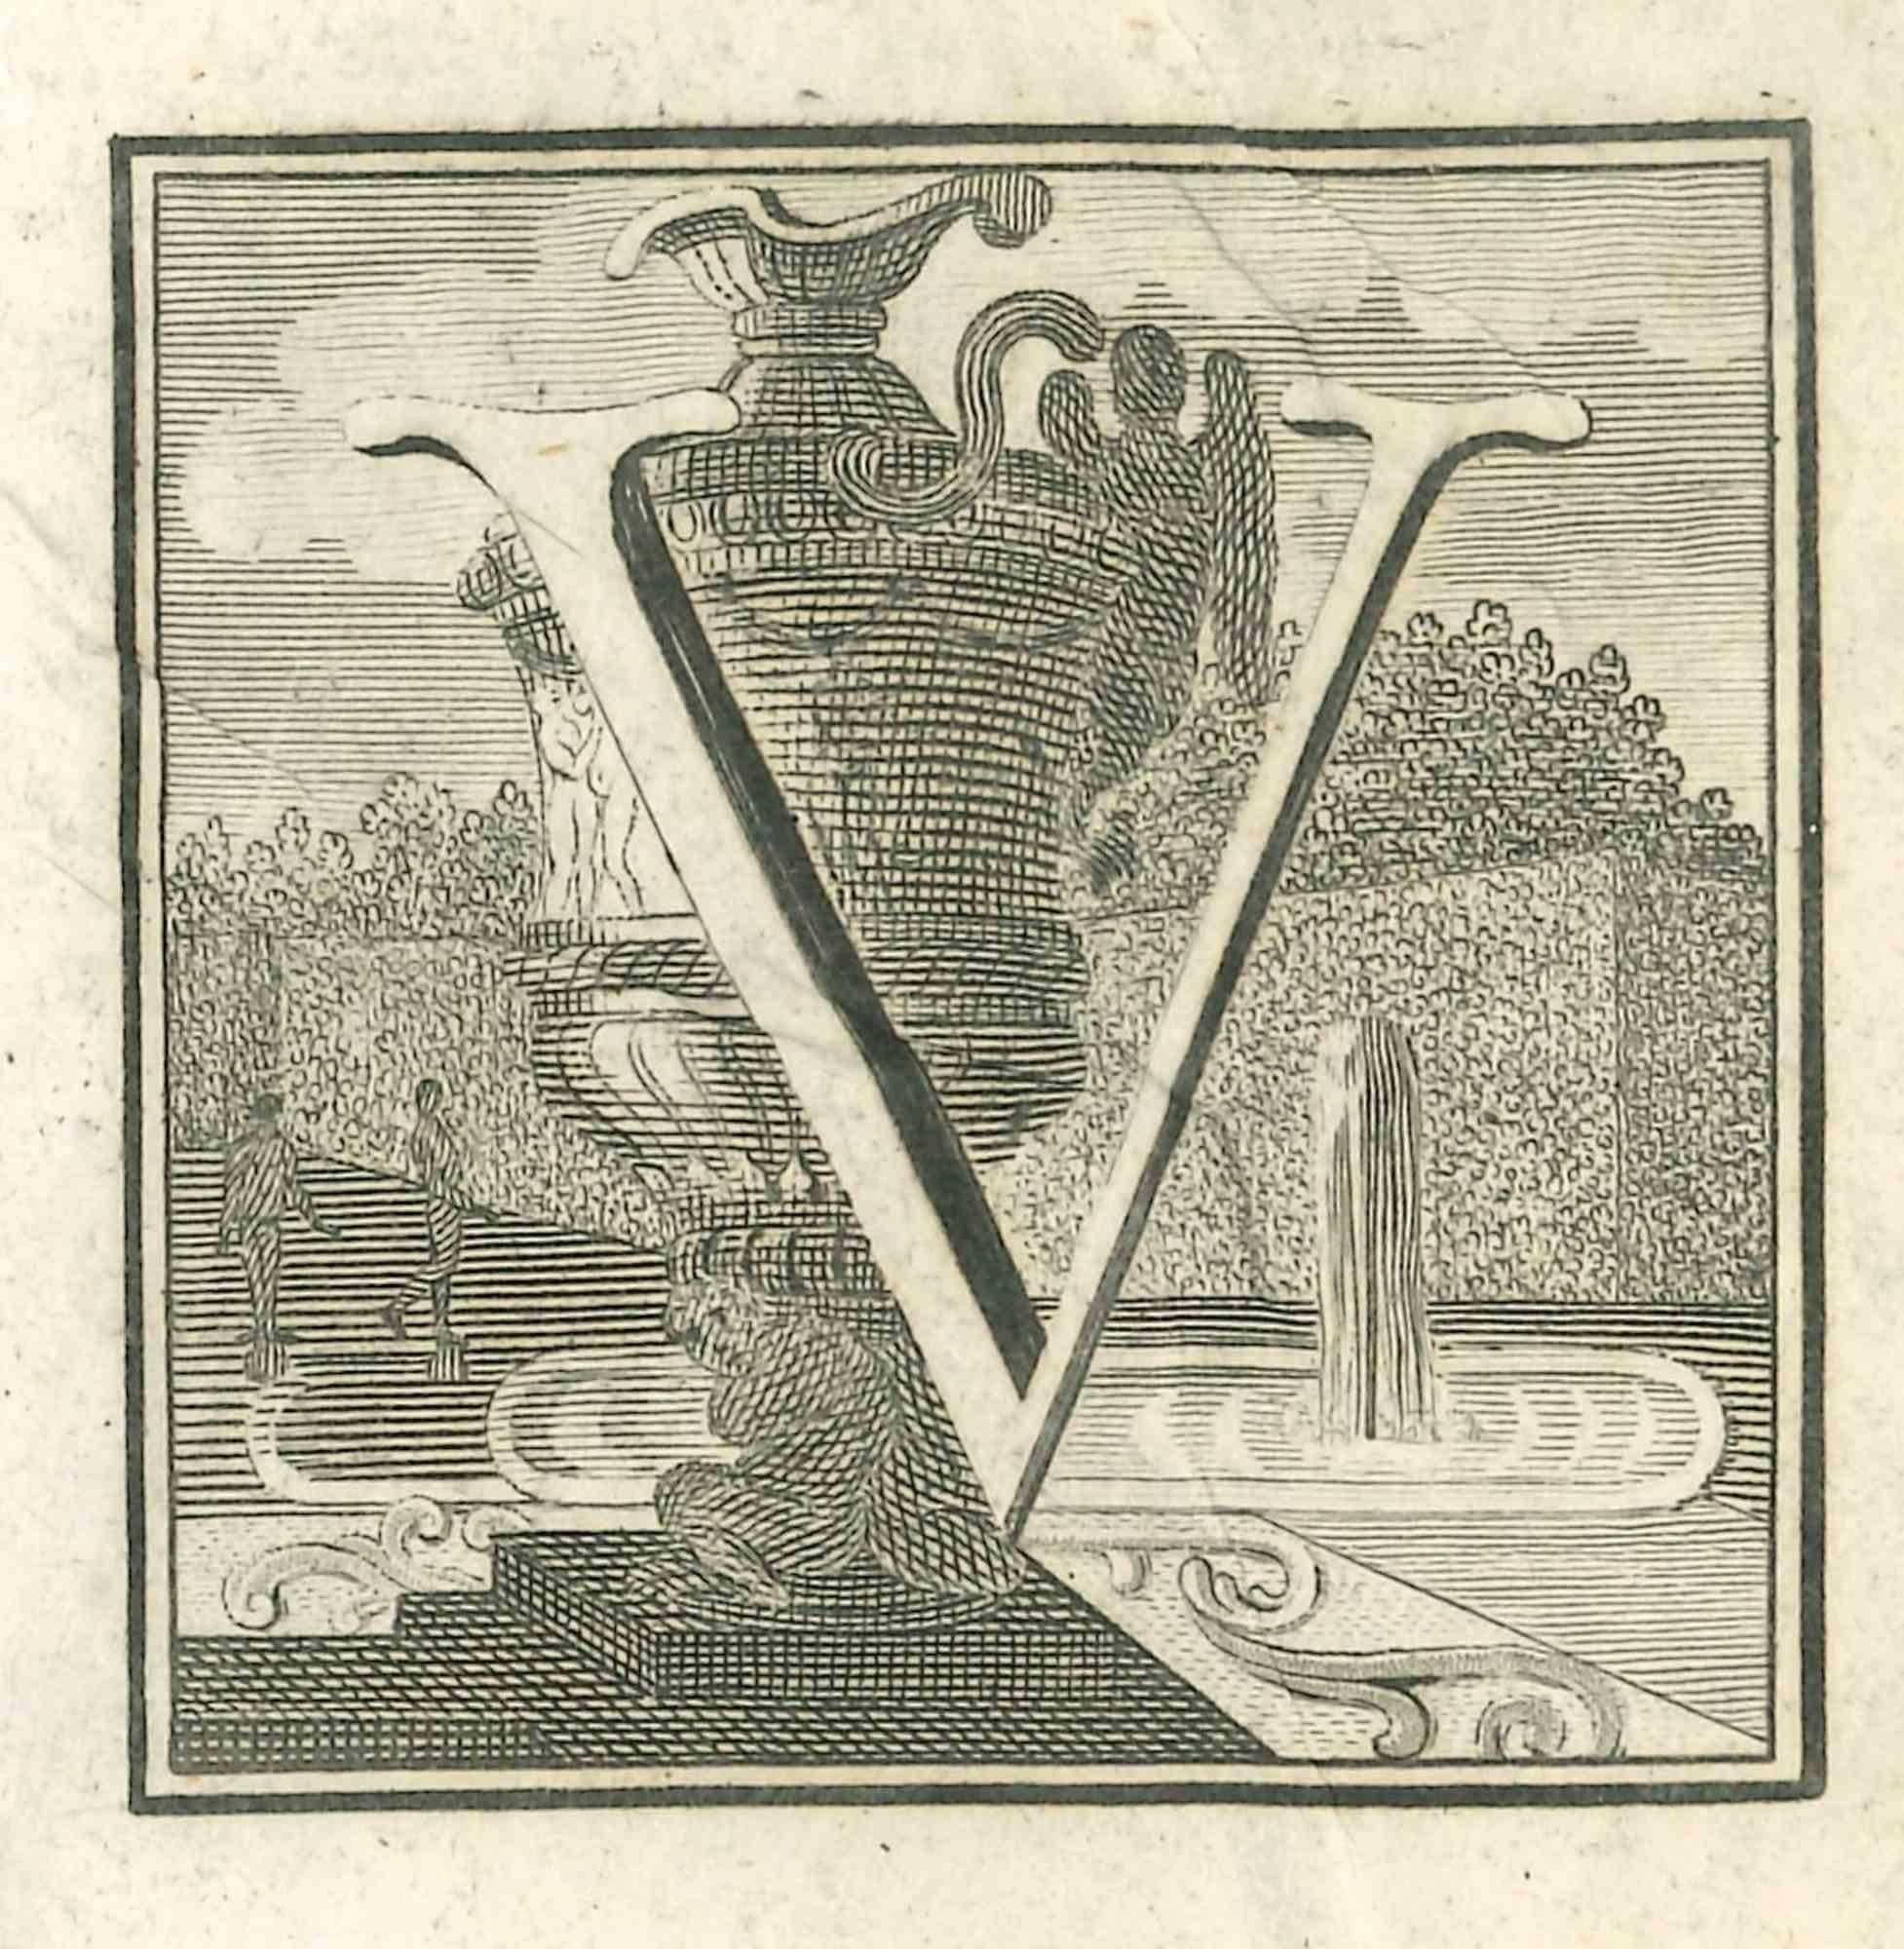 Letter V is an Etching realized by Luigi Vanvitelli.

The etching belongs to the print suite “Antiquities of Herculaneum Exposed” (original title: “Le Antichità di Ercolano Esposte”), an eight-volume volume of engravings of the finds from the